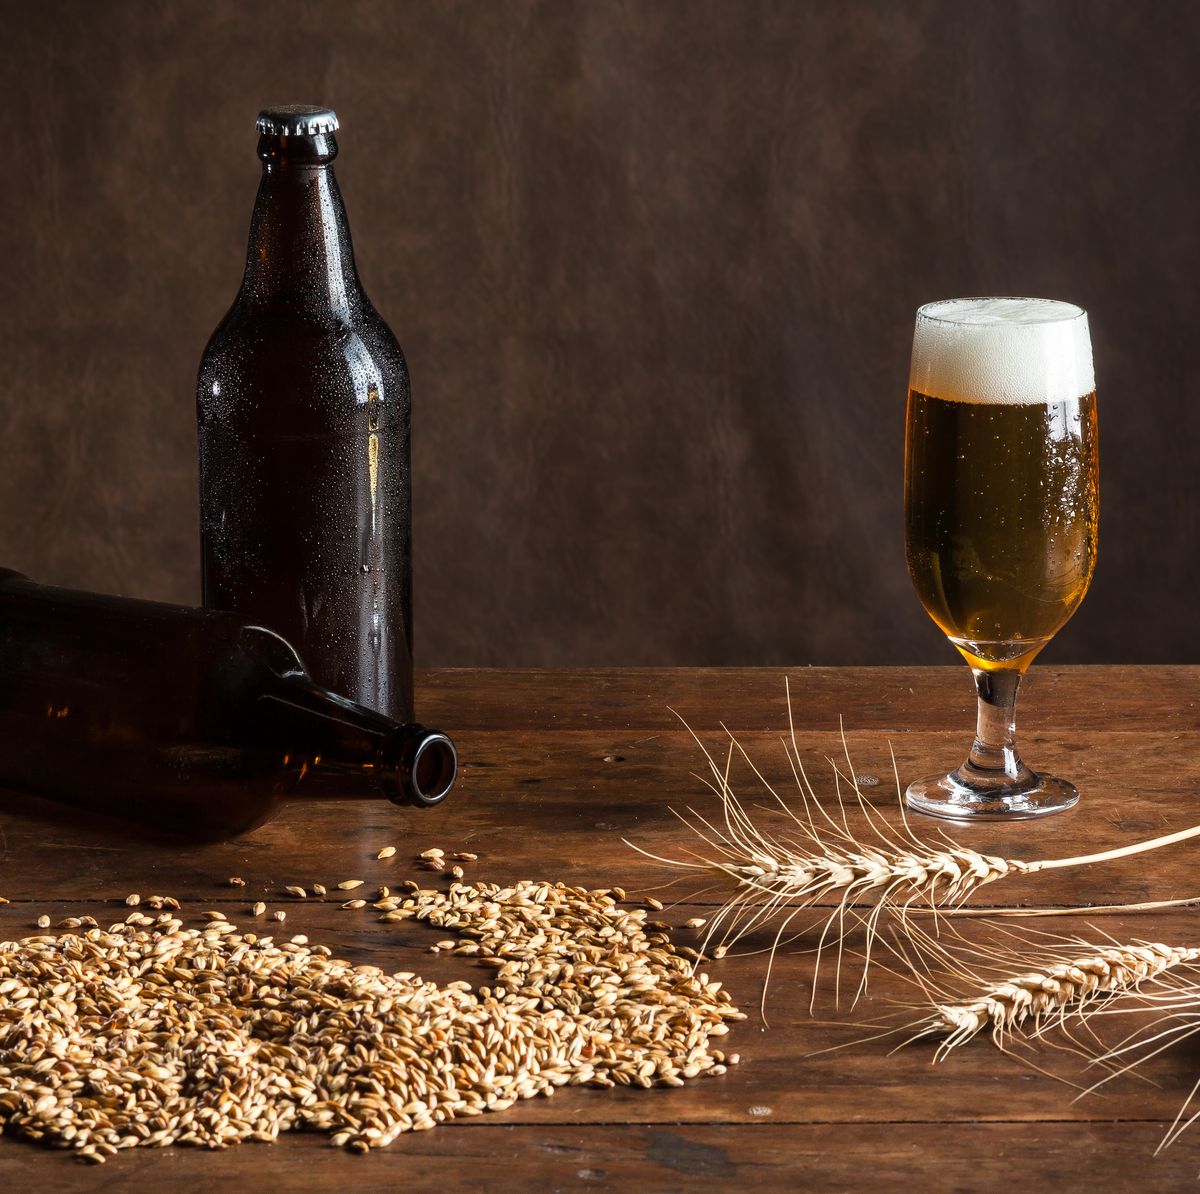 https://hips.hearstapps.com/hmg-prod/images/glass-of-beer-on-the-table-with-wheat-malt-barley-royalty-free-image-881762668-1534183770.jpg?crop=0.670xw:1.00xh;0.167xw,0&resize=1200:*